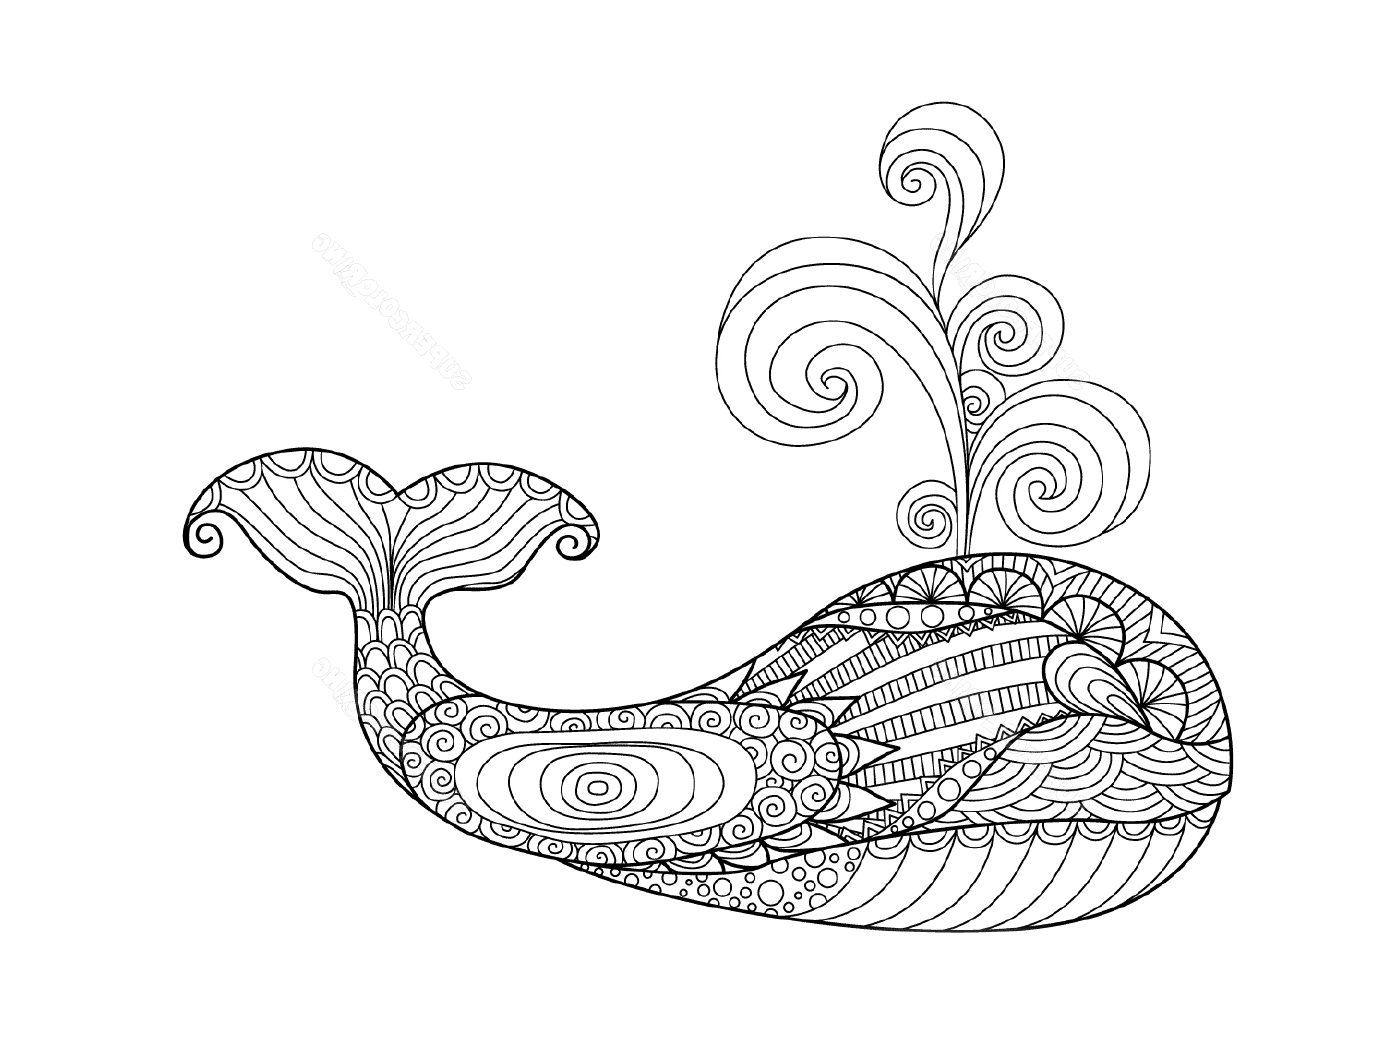  Whale with swirling patterns 